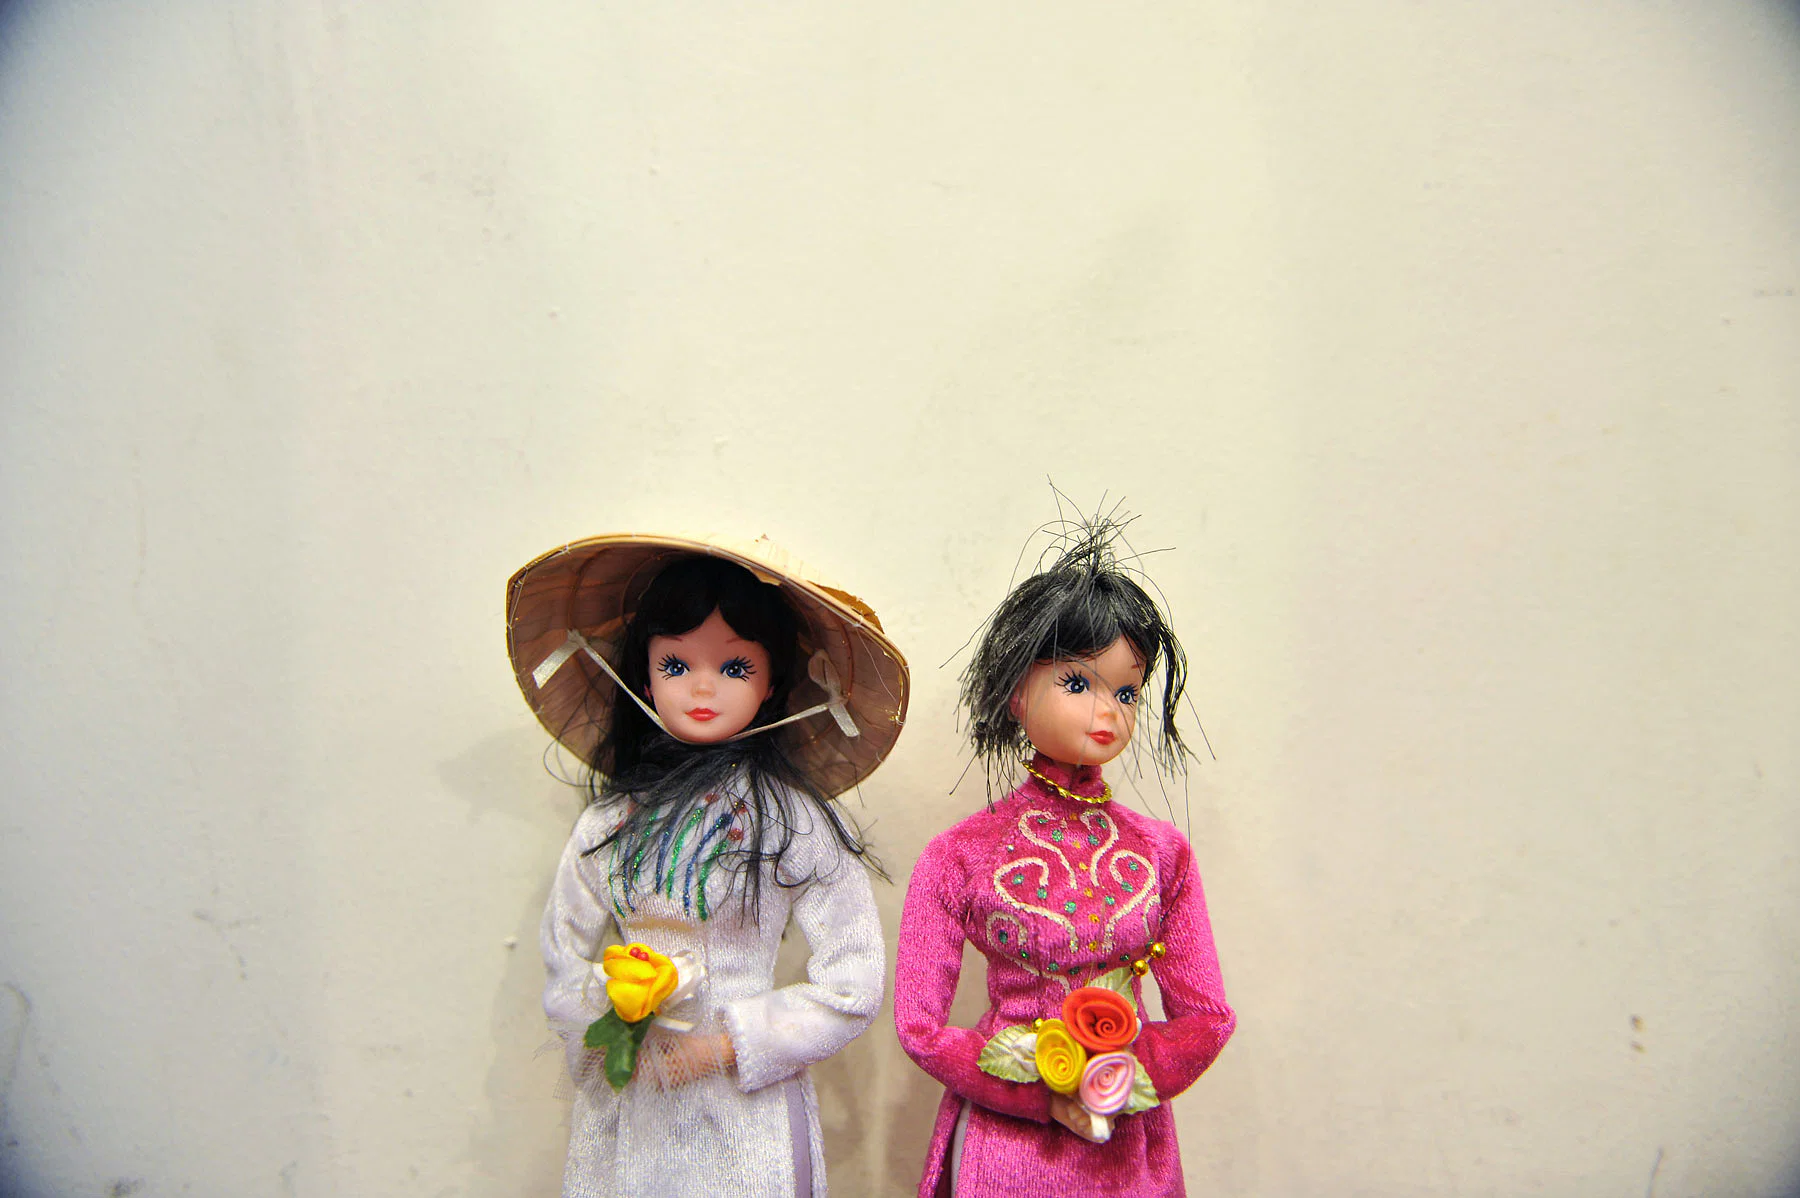 The Government has put in place policies and programmes to help foreign brides and their families. Photo: Ng Sor Luan.